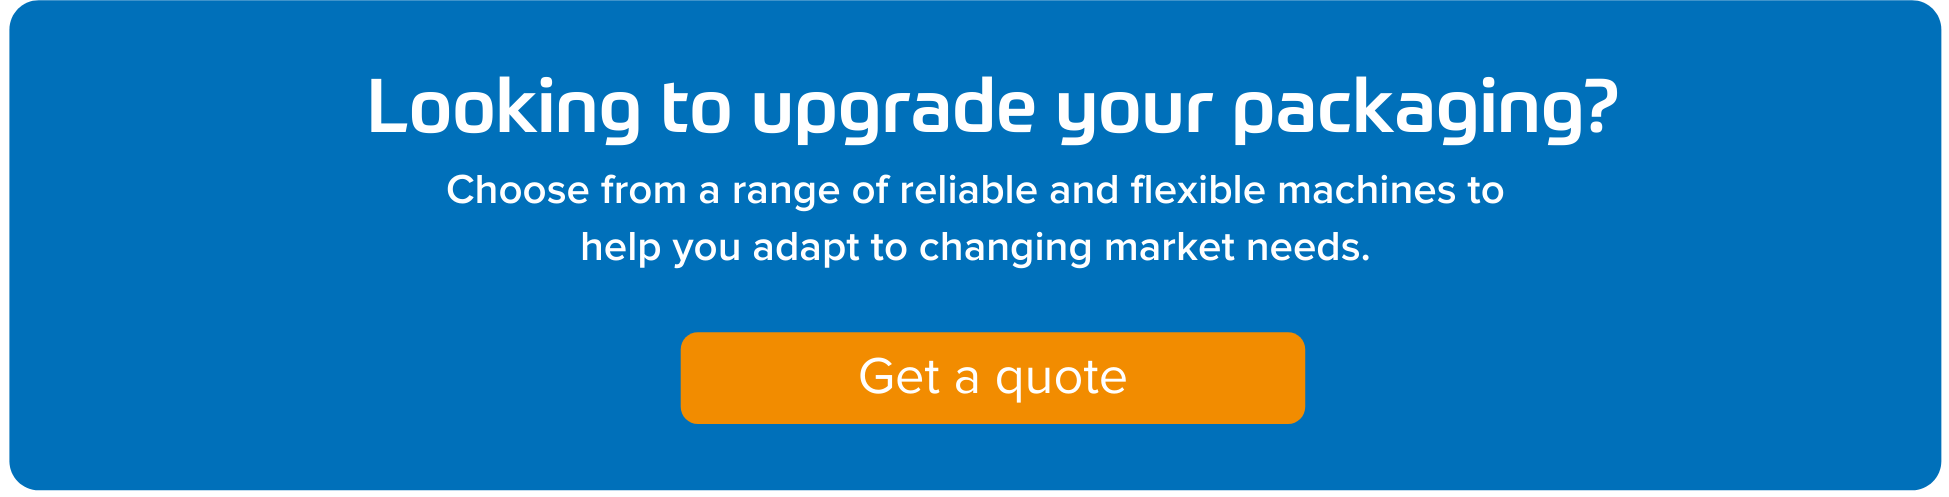 Looking to upgrade your packaging? Choose from a range of reliable and flexible machines to help you adapt to changing market needs